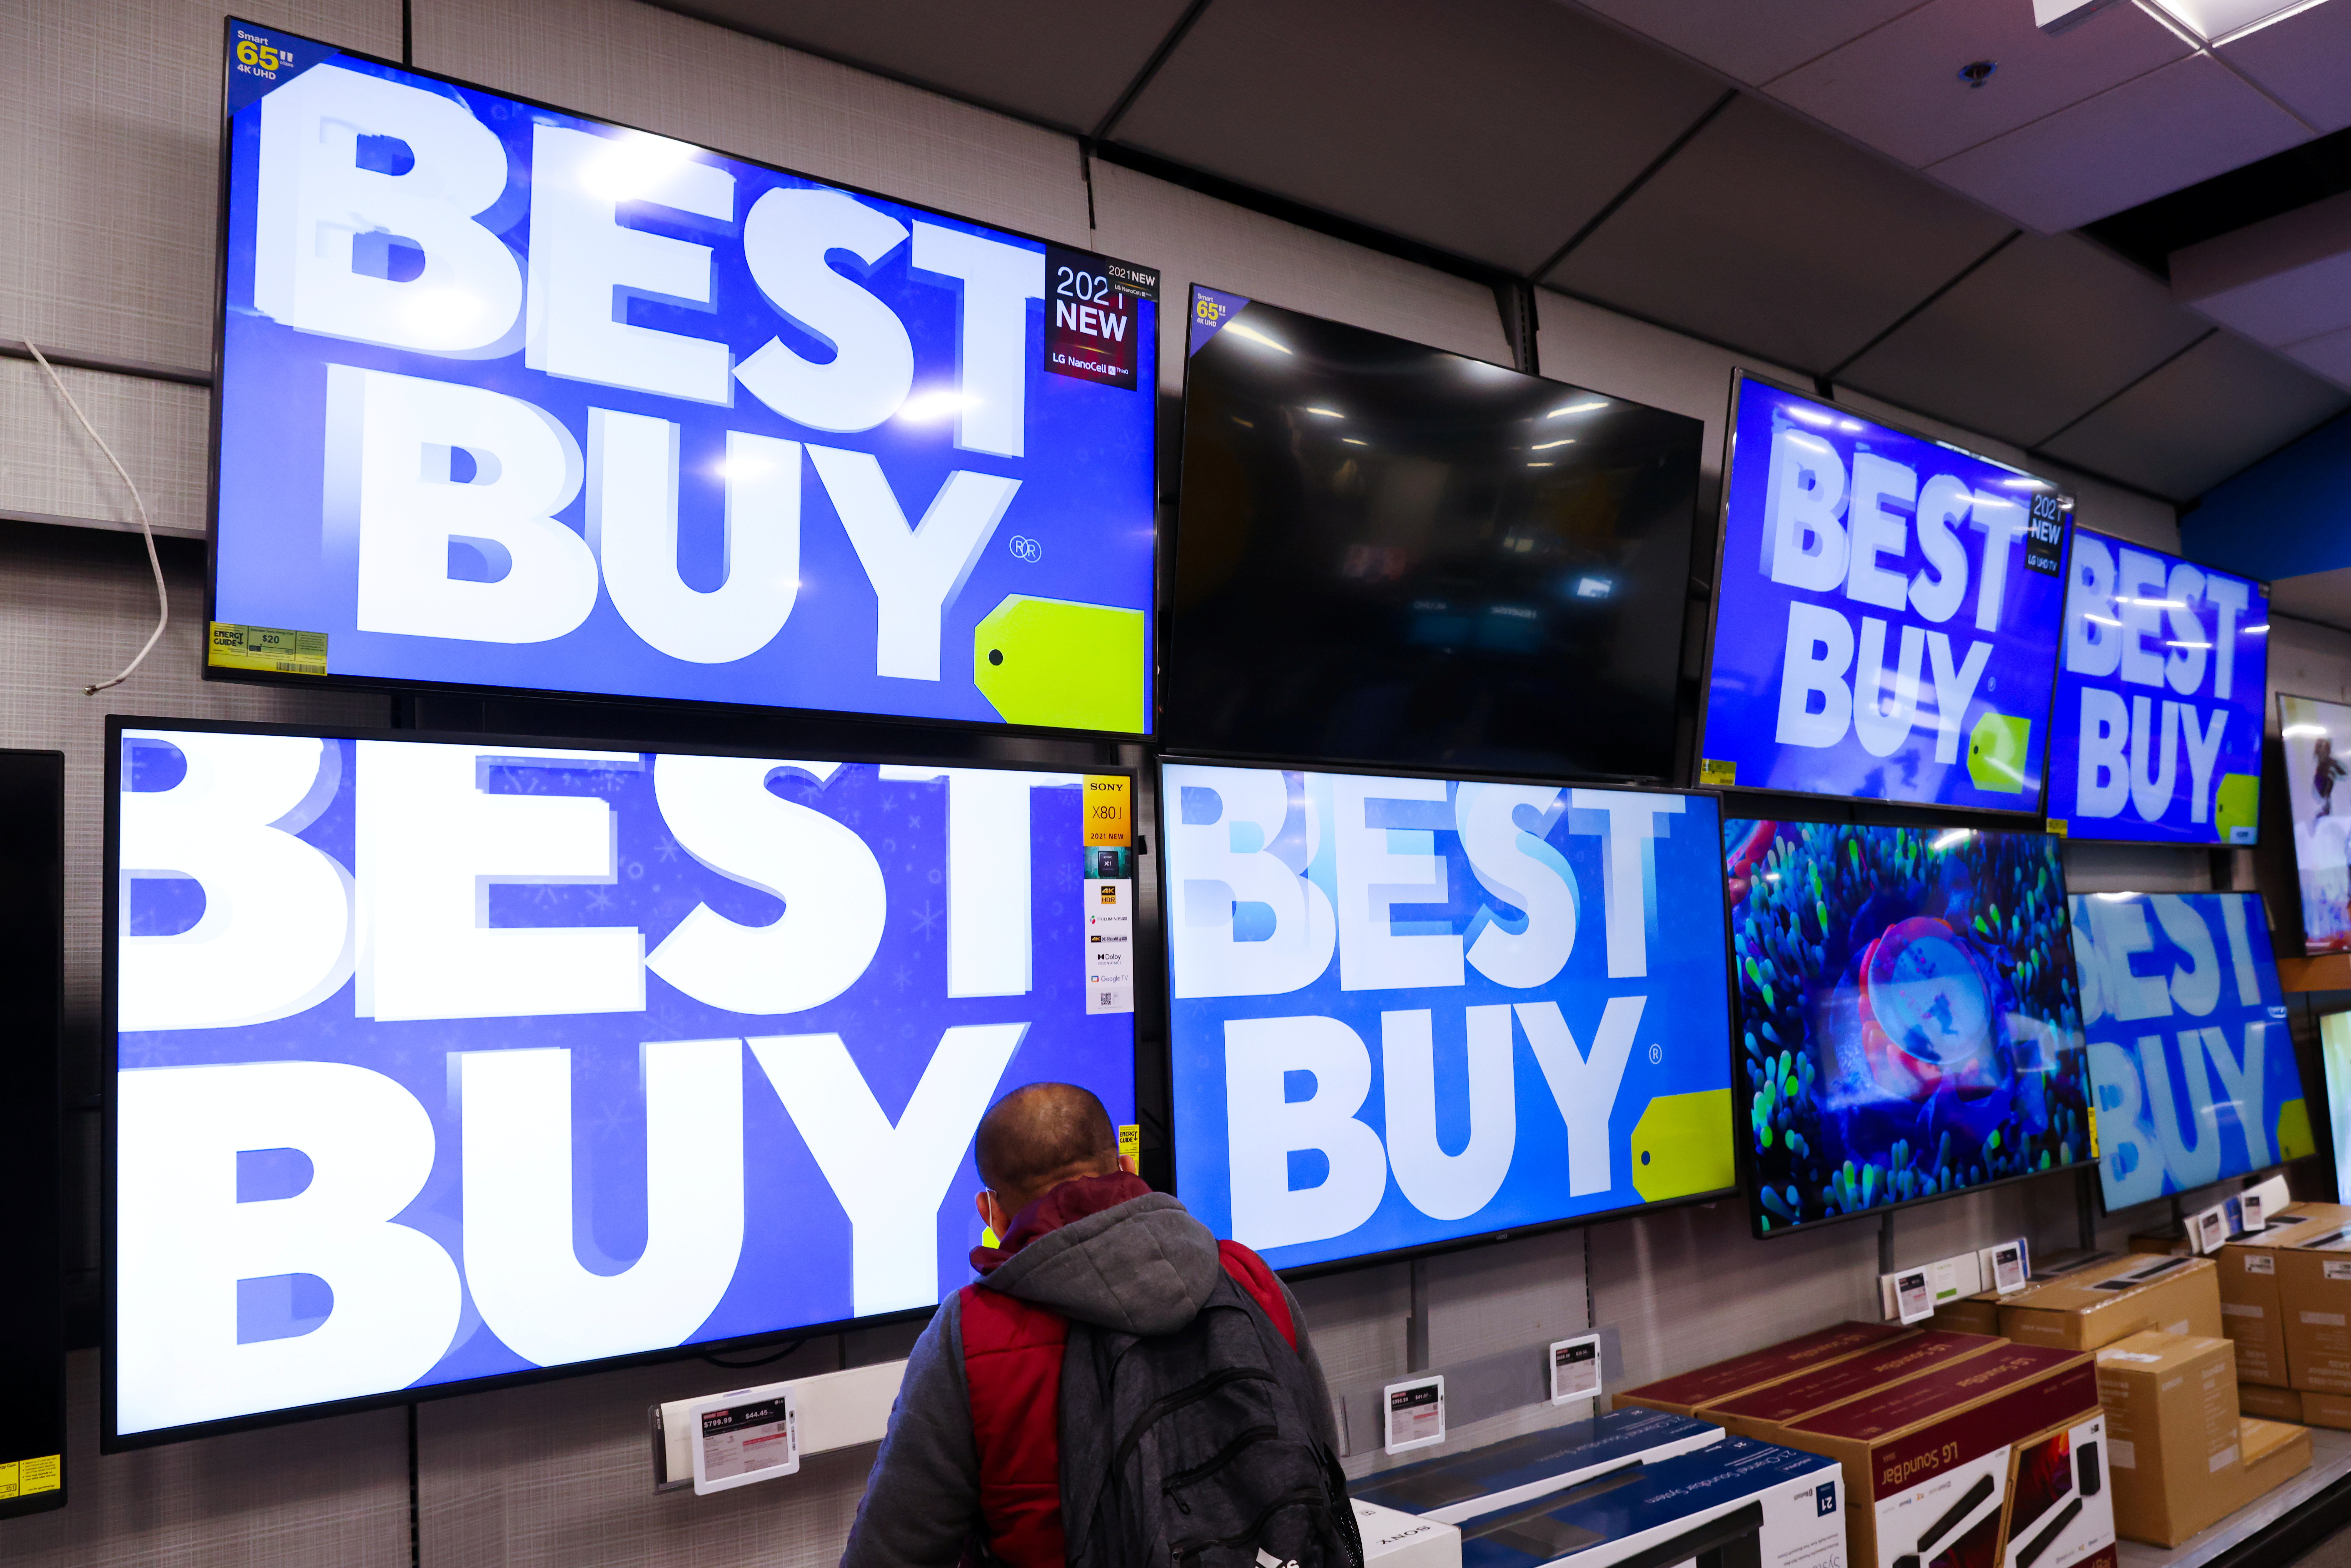 Televisions are seen for sale at a Best Buy store in Manhattan, New York City